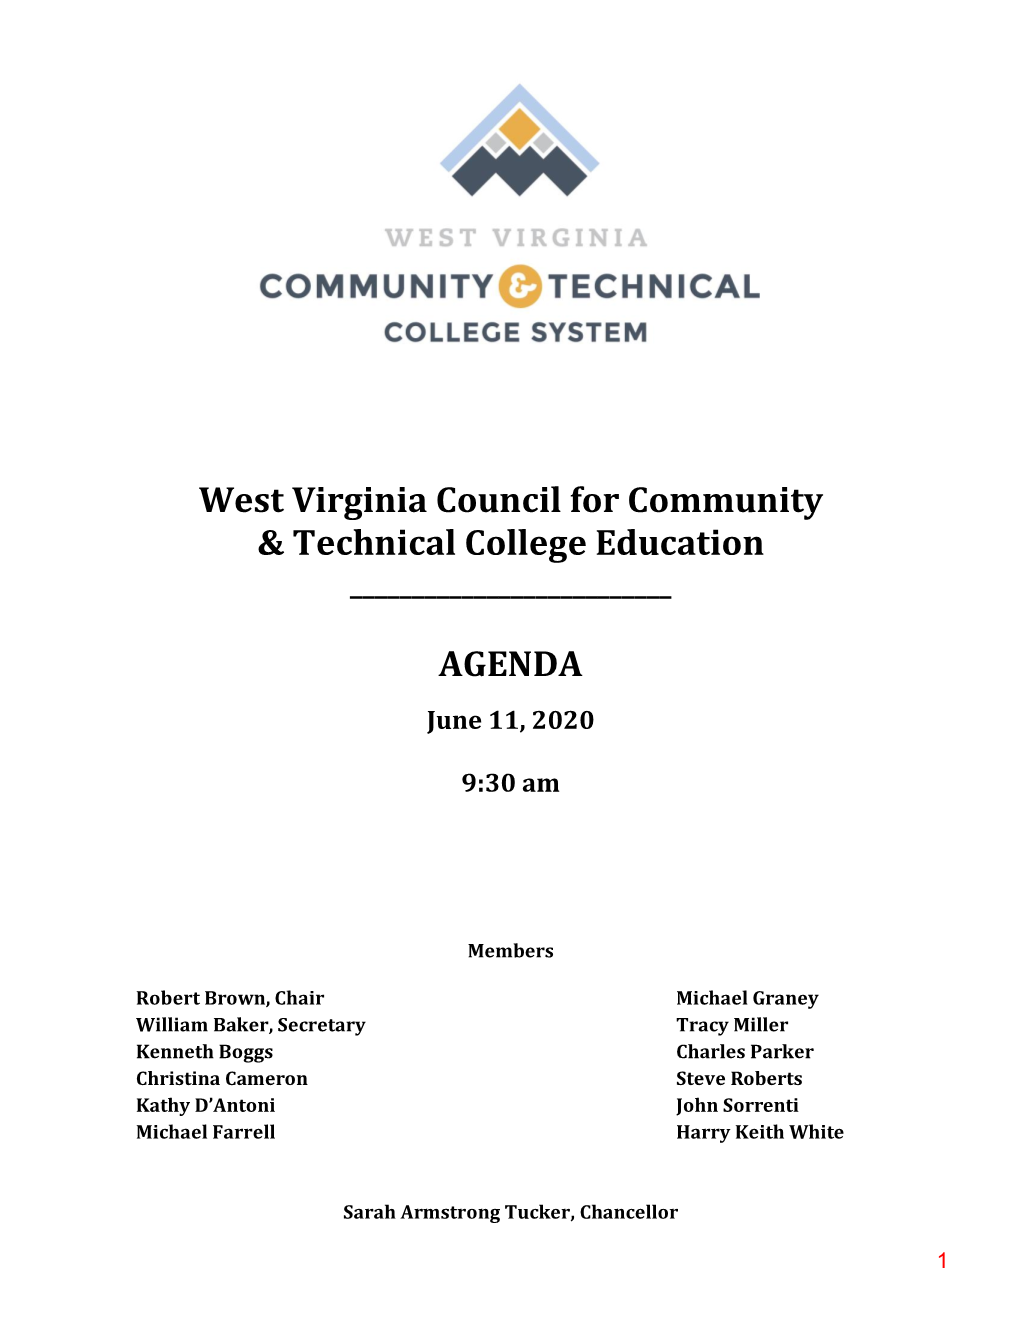 West Virginia Council for Community & Technical College Education